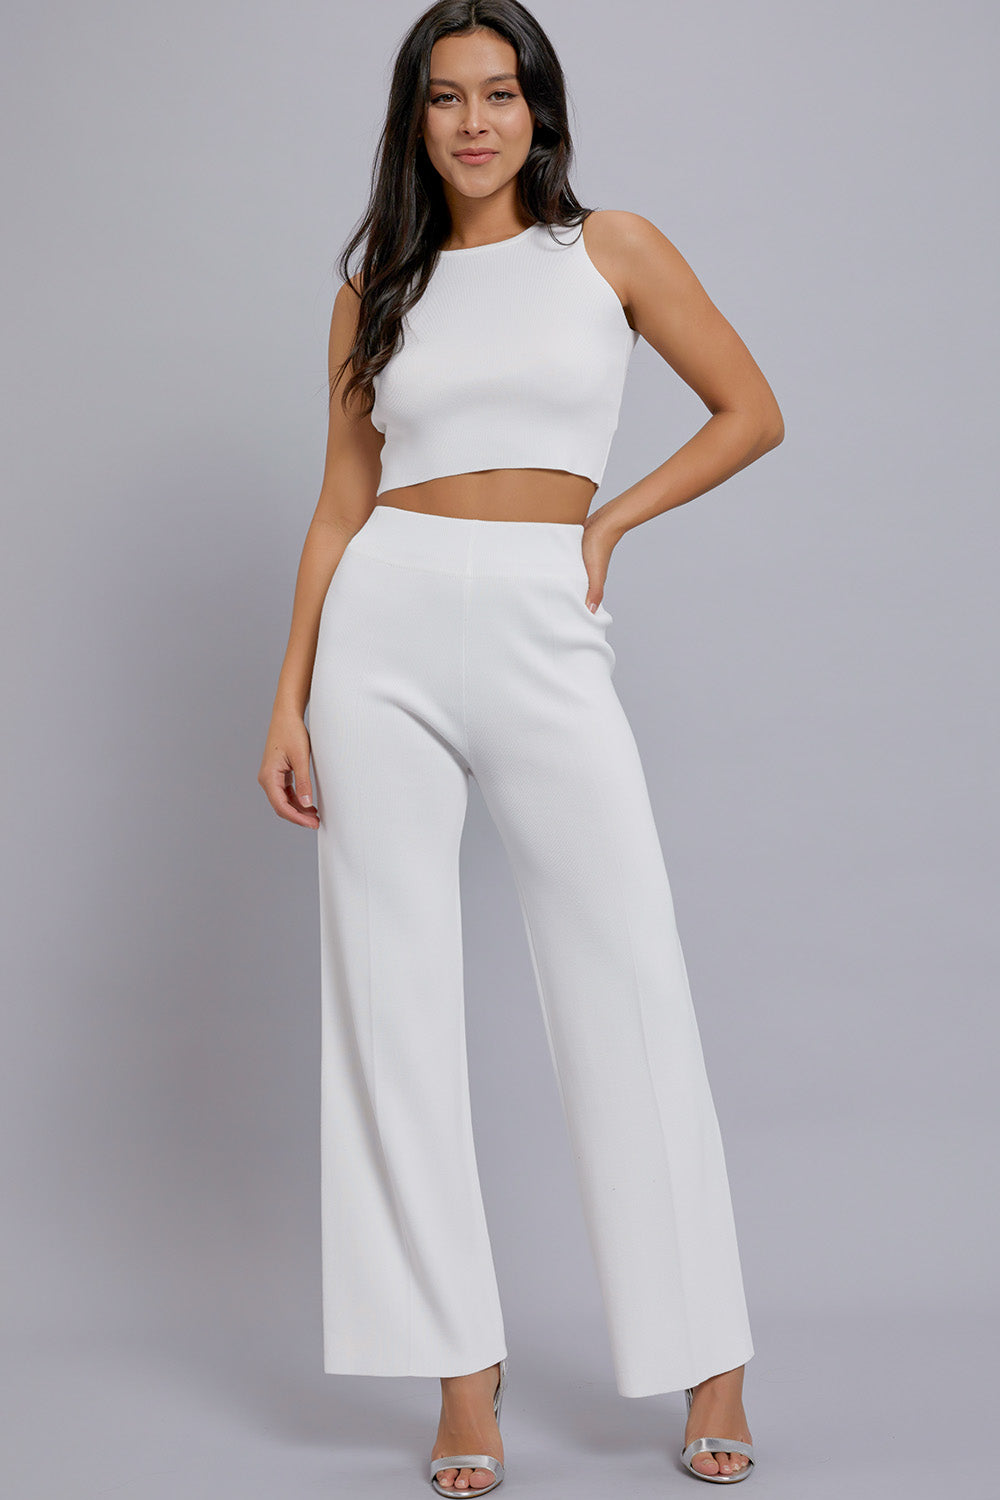 Solid Sleeveless Two Pieces Set